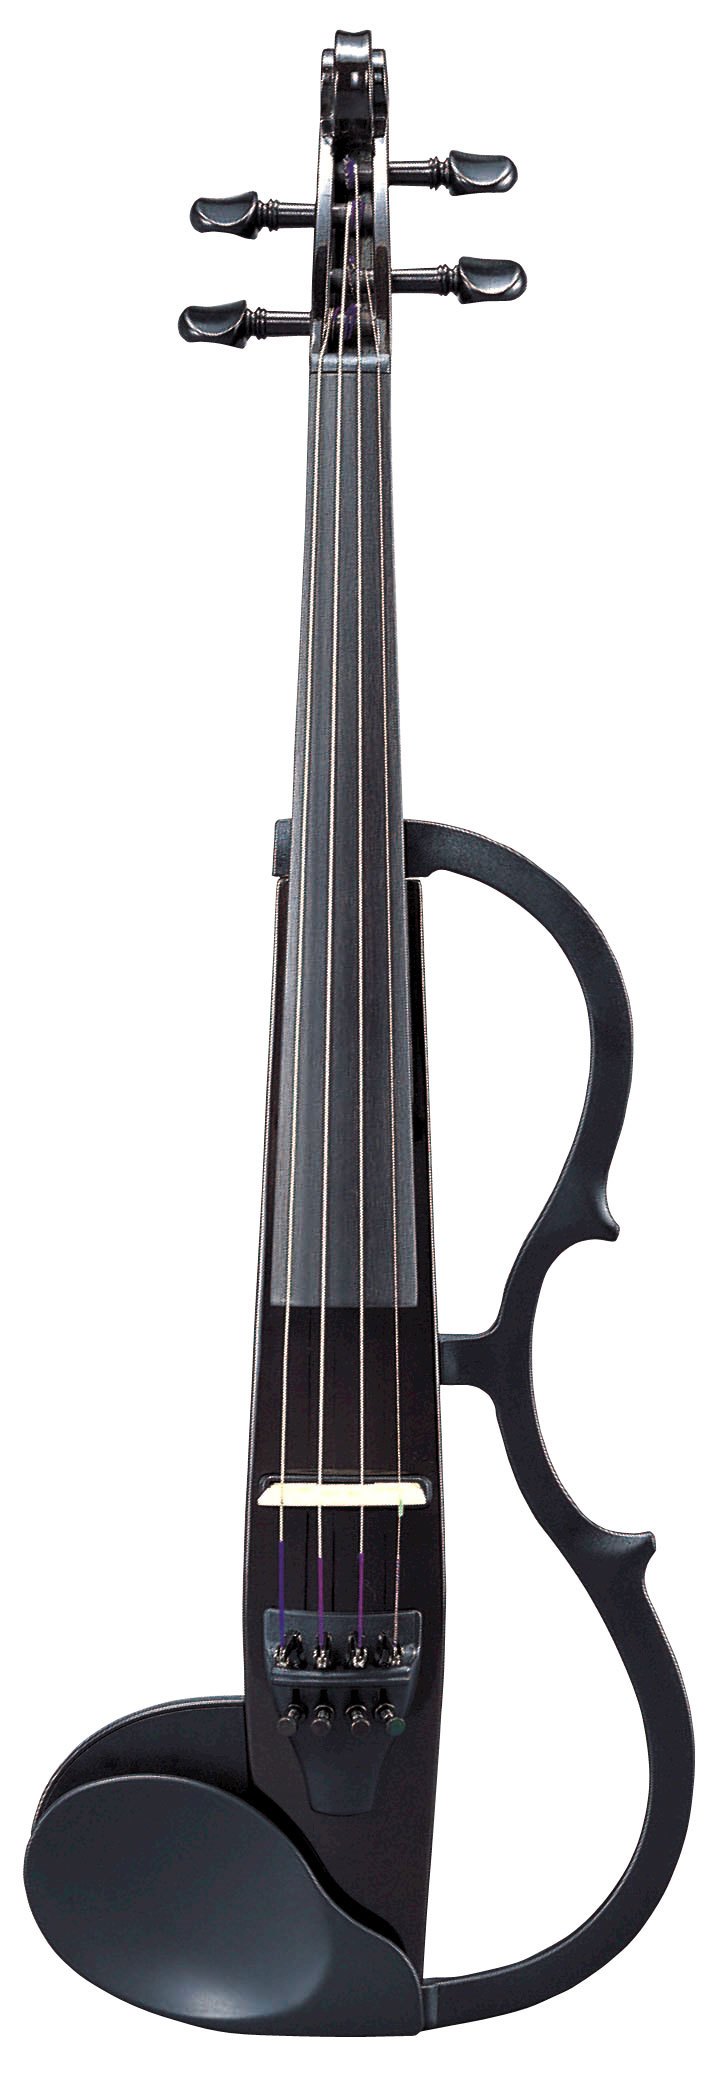 SV130/SV130S - Overview - SILENT™ SERIES - Strings - Musical 